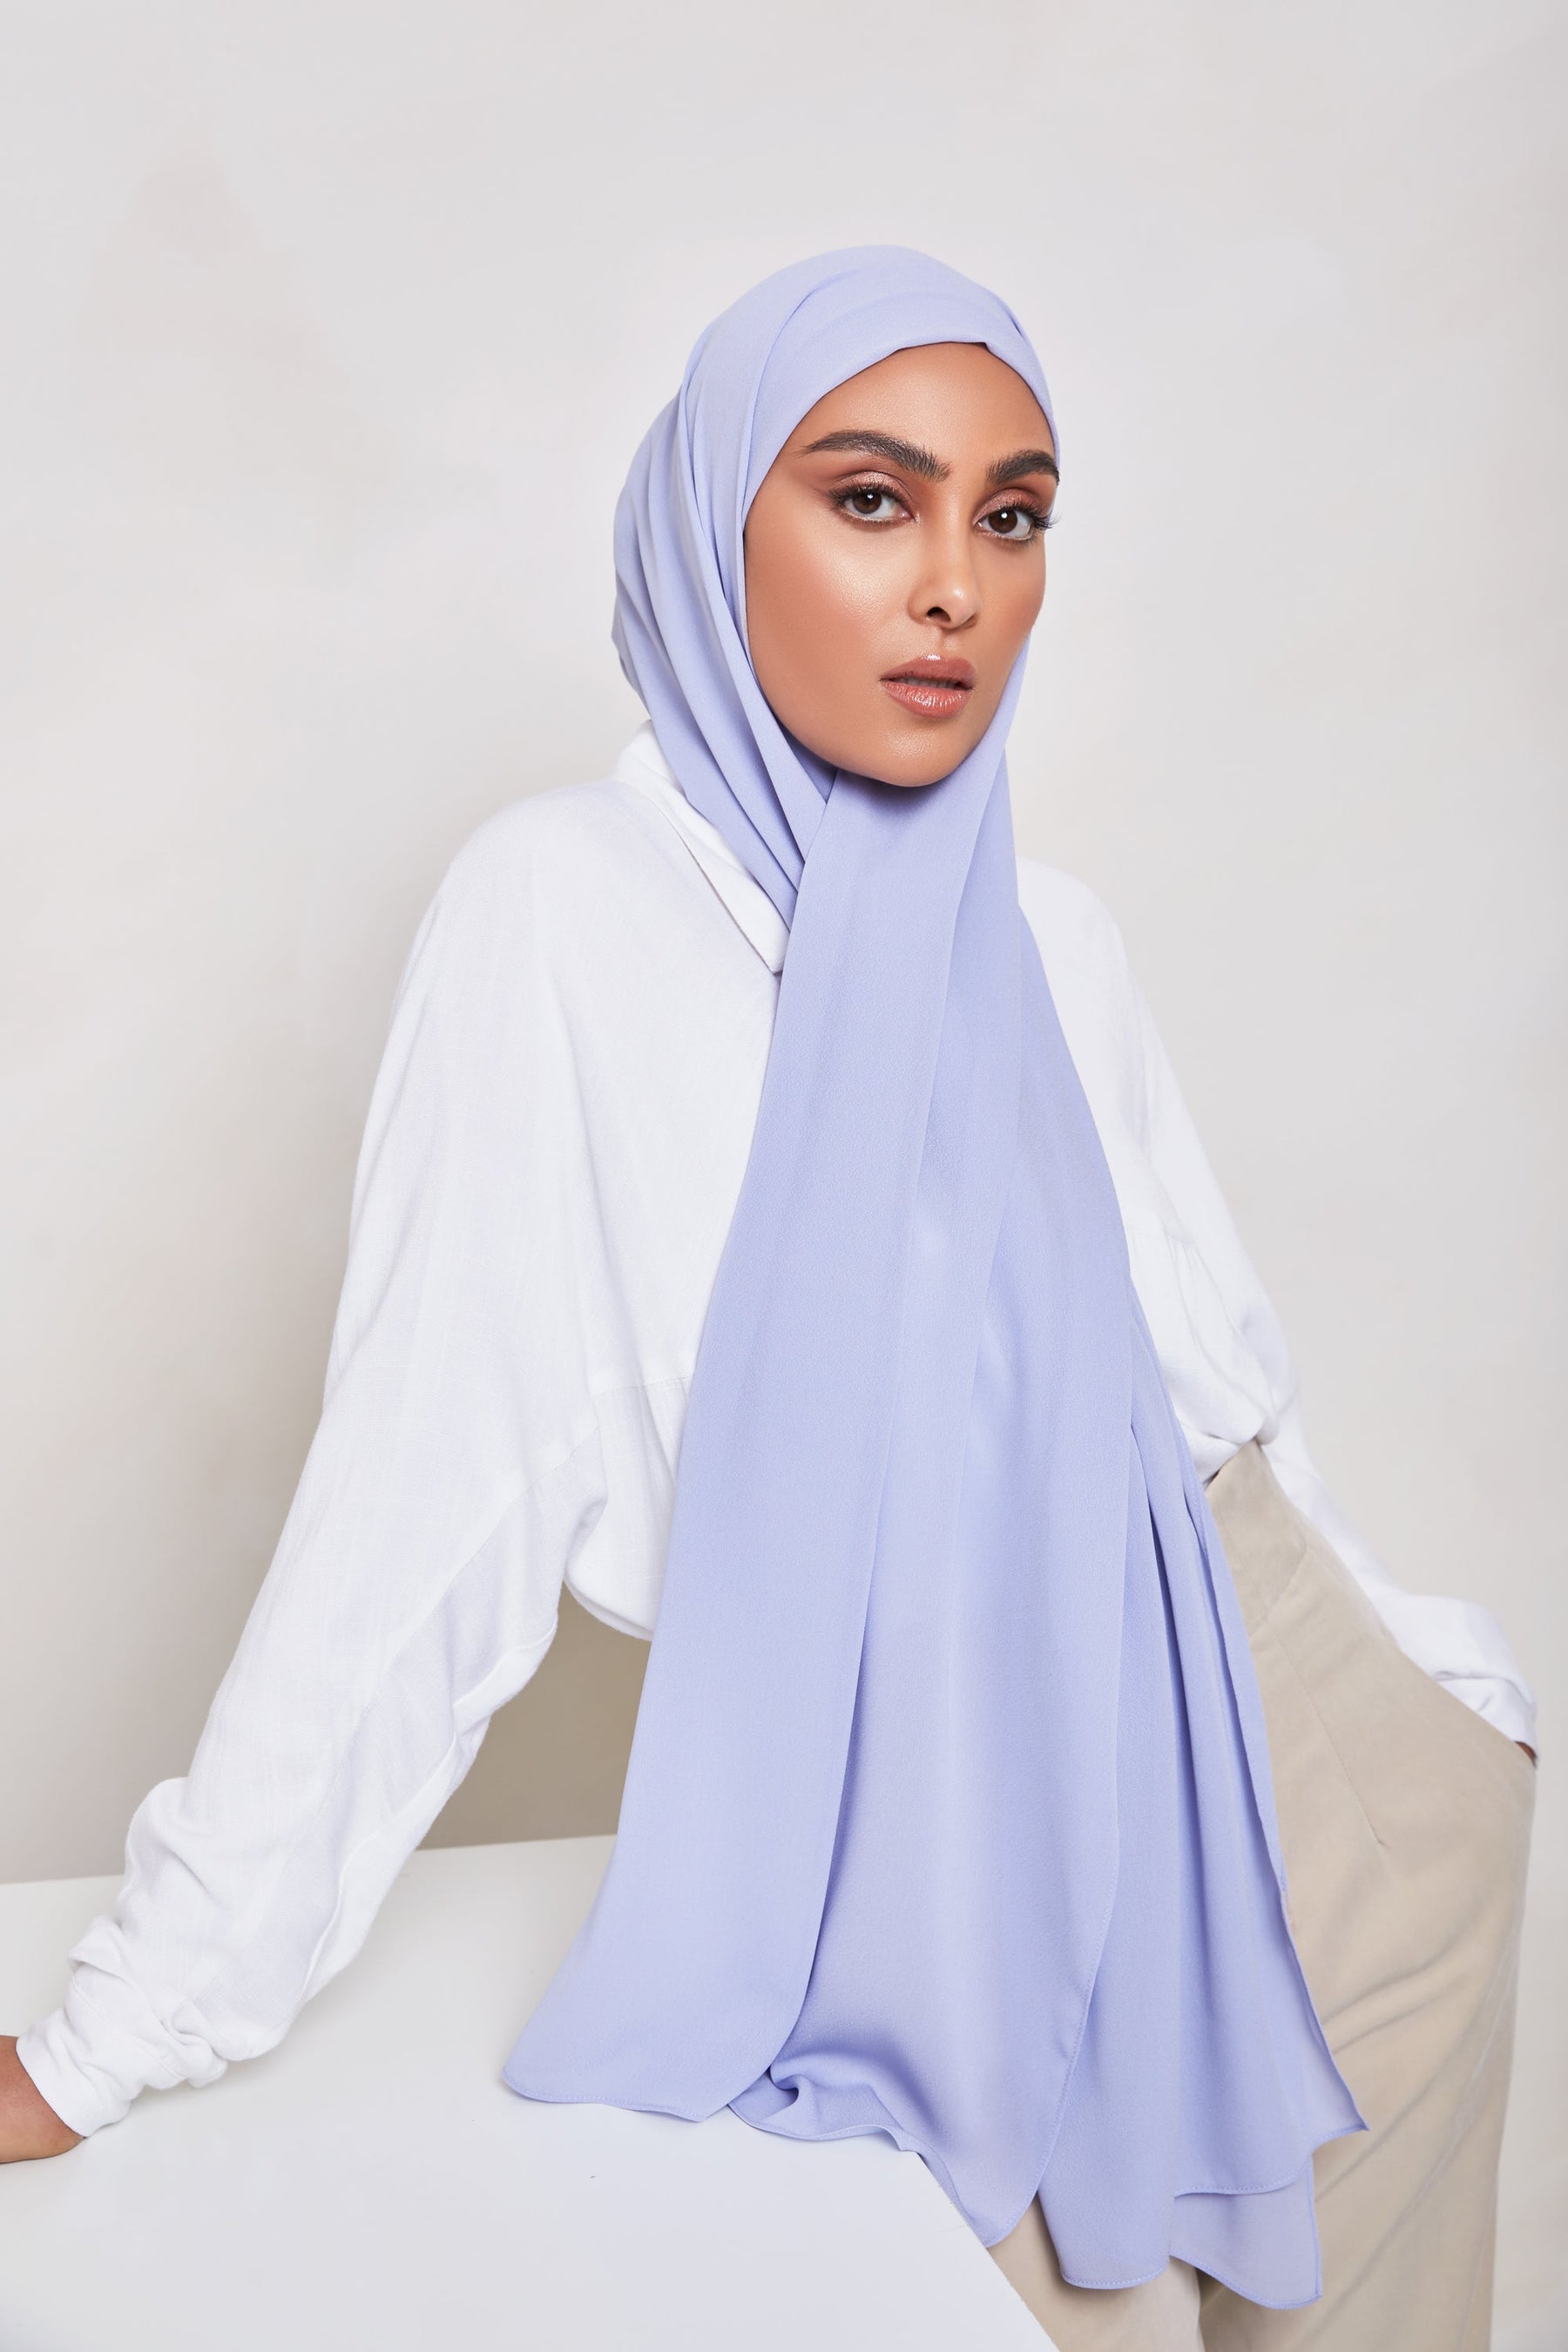 TEXTURE Everyday Chiffon Hijab - Something Blue Veiled Collection 